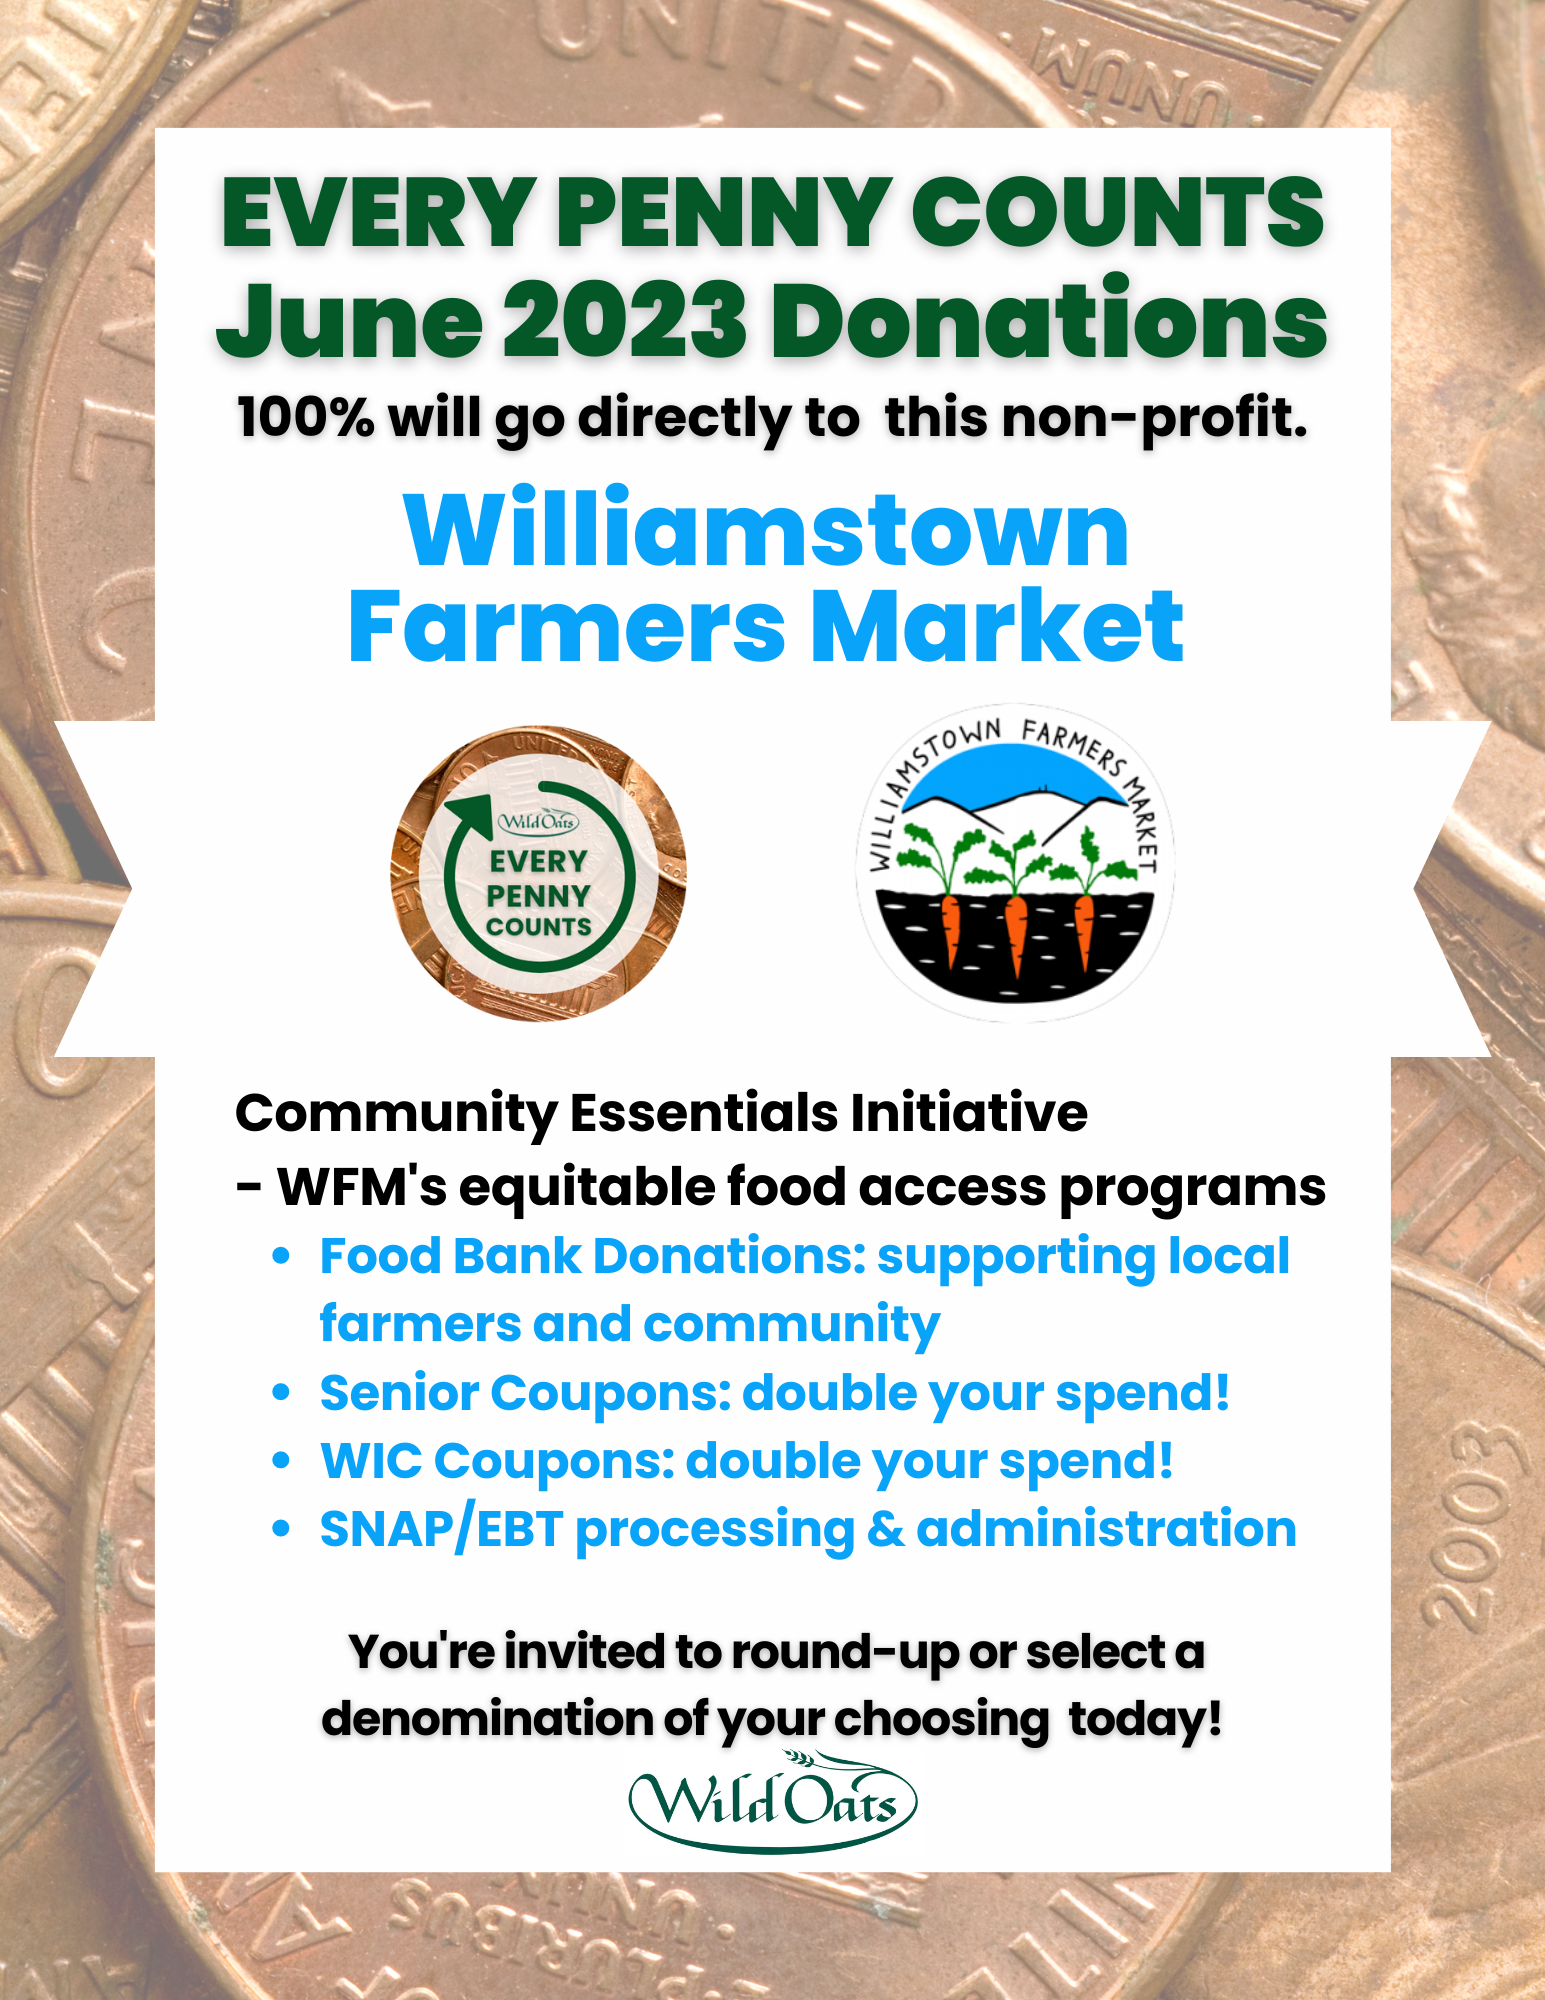 Every Penny Counts Wiliamstown Farmers Market Flyer.png